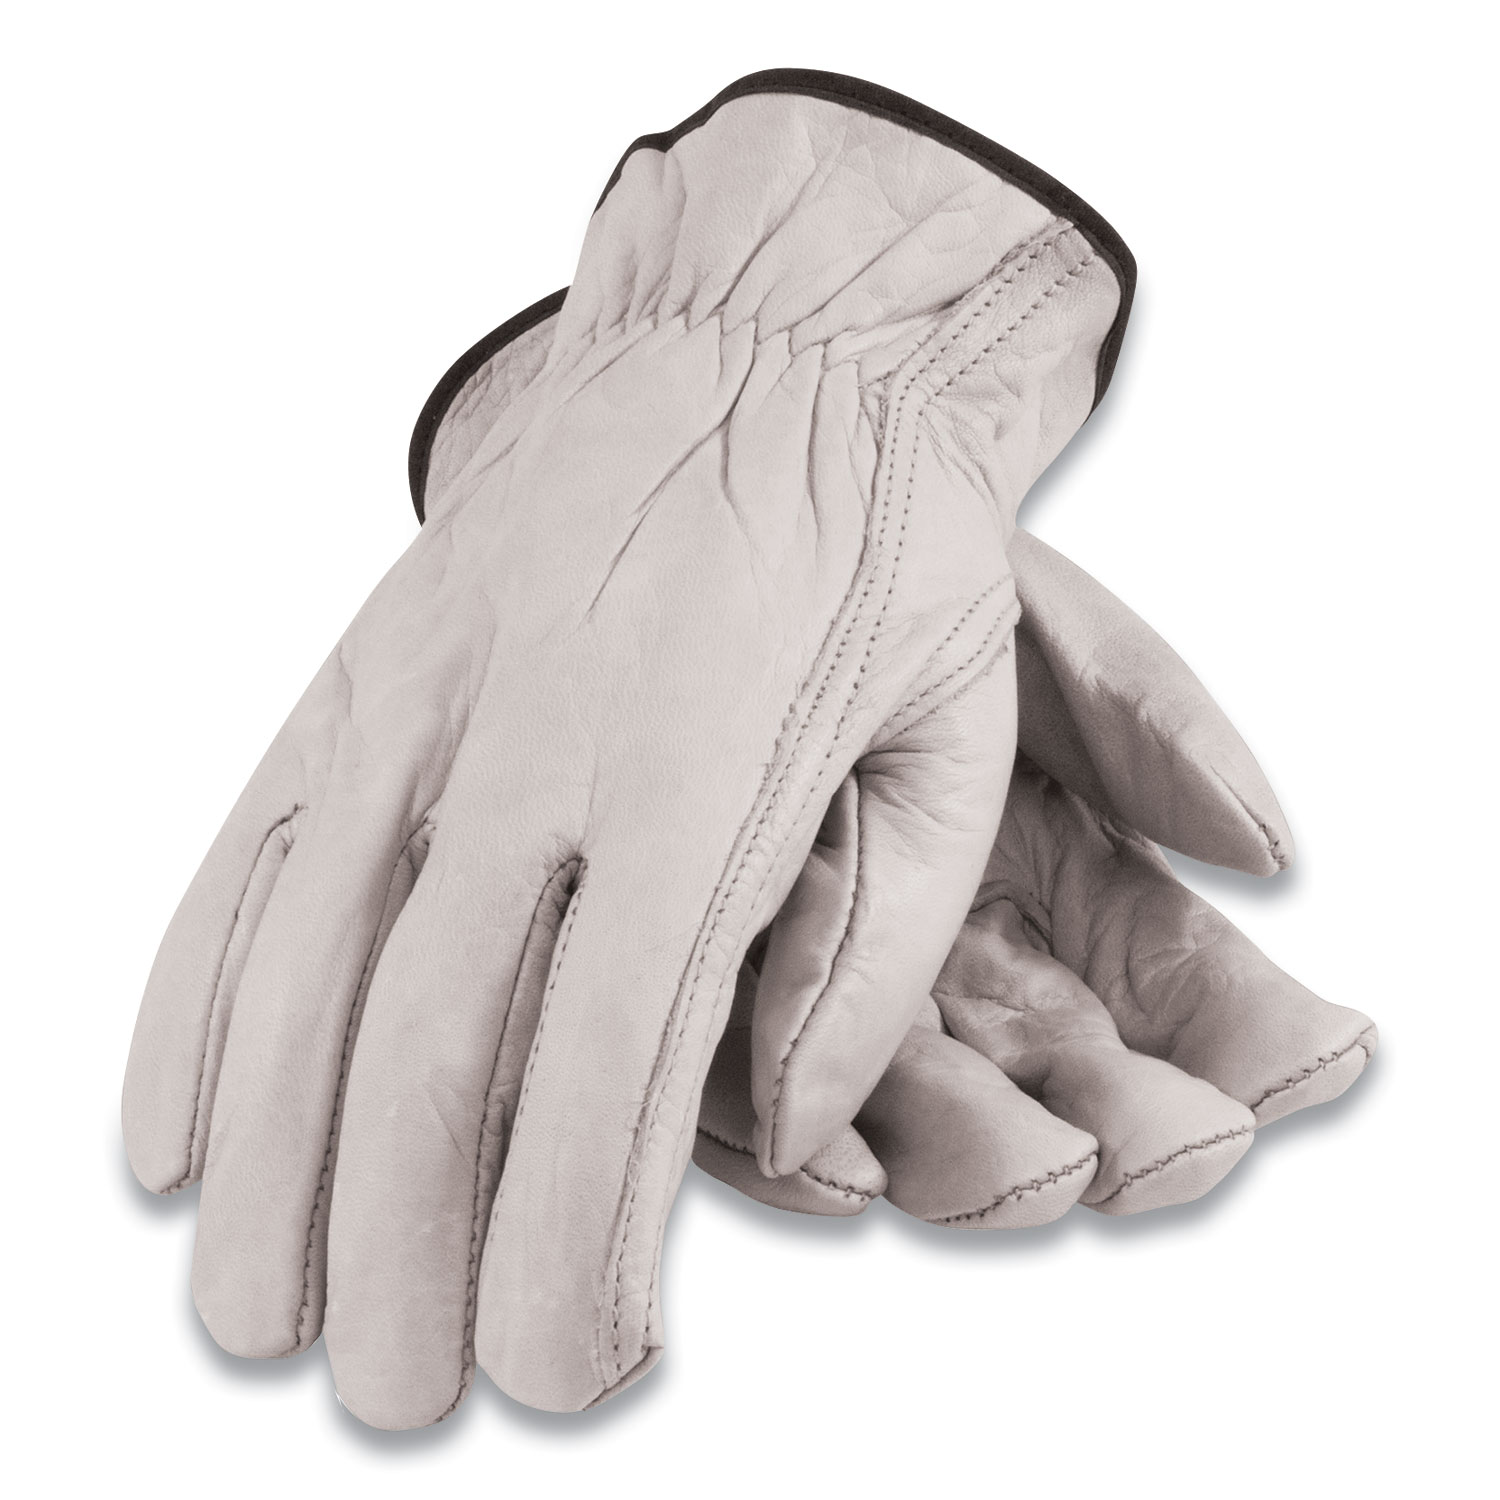 Pip Economy Grade Top-Grain Cowhide Leather Work Gloves, X-Large, Tan